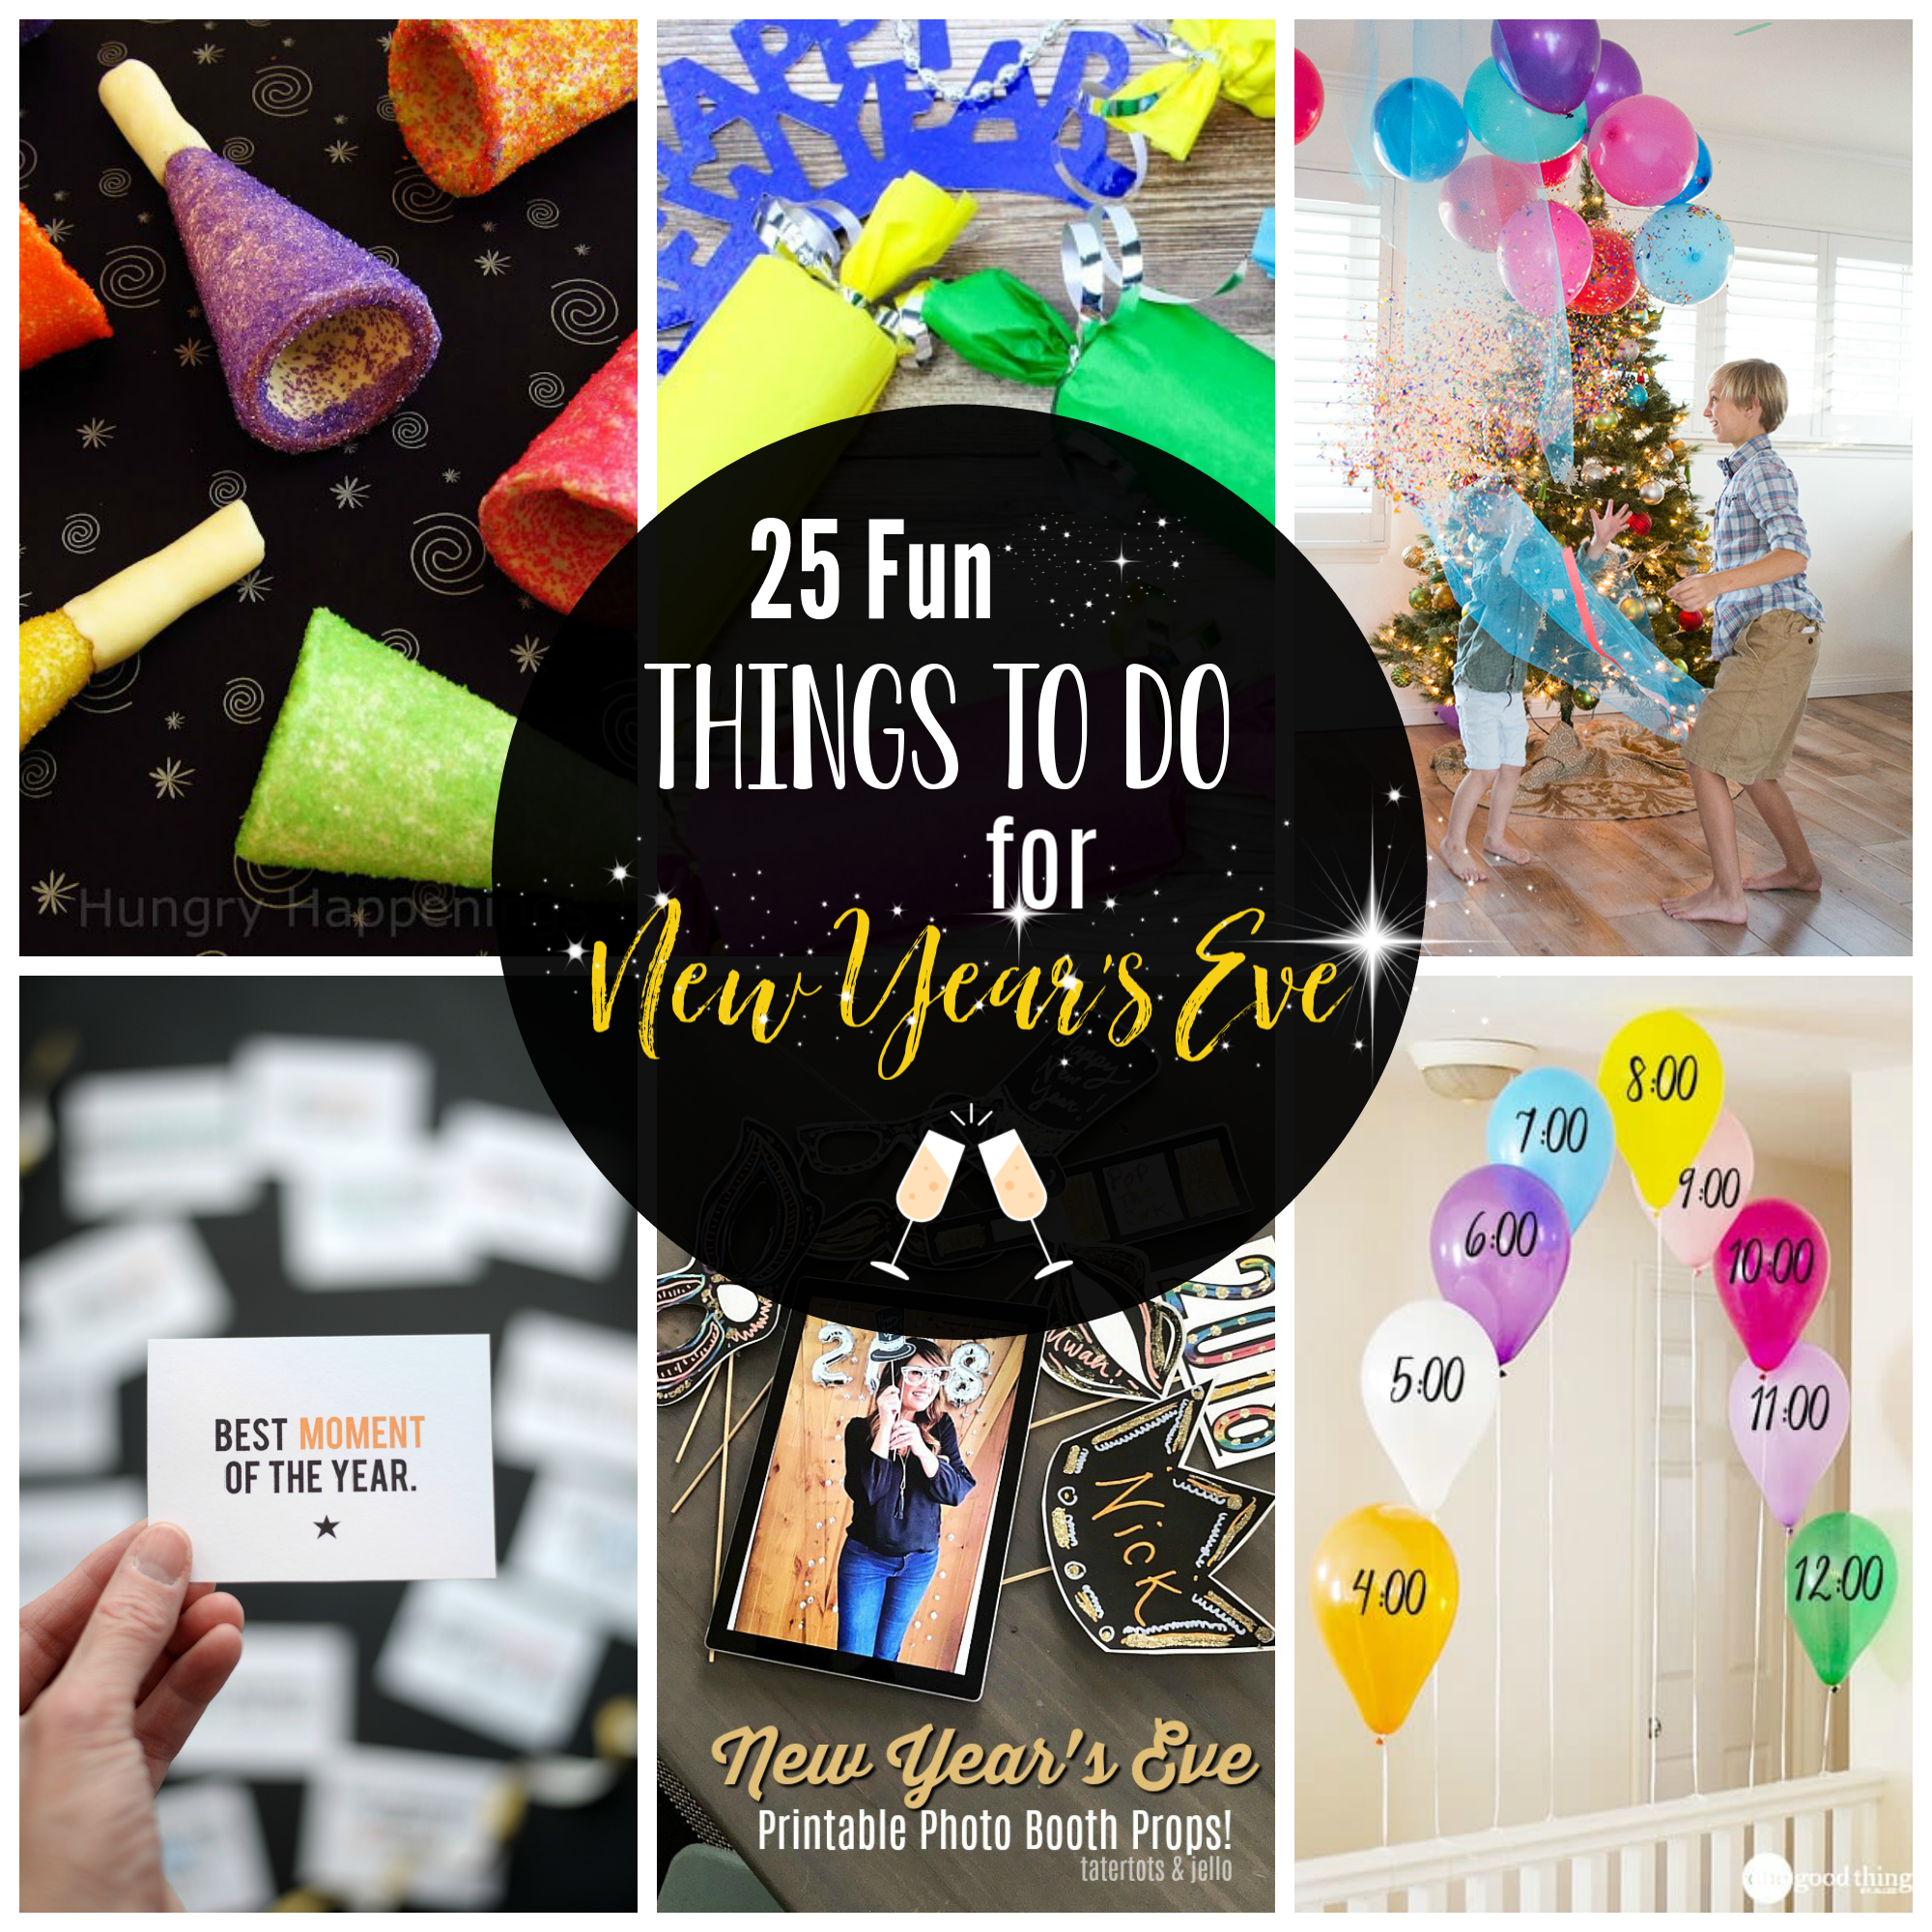 Things to do for New Year's Eve with Kids and Family at home